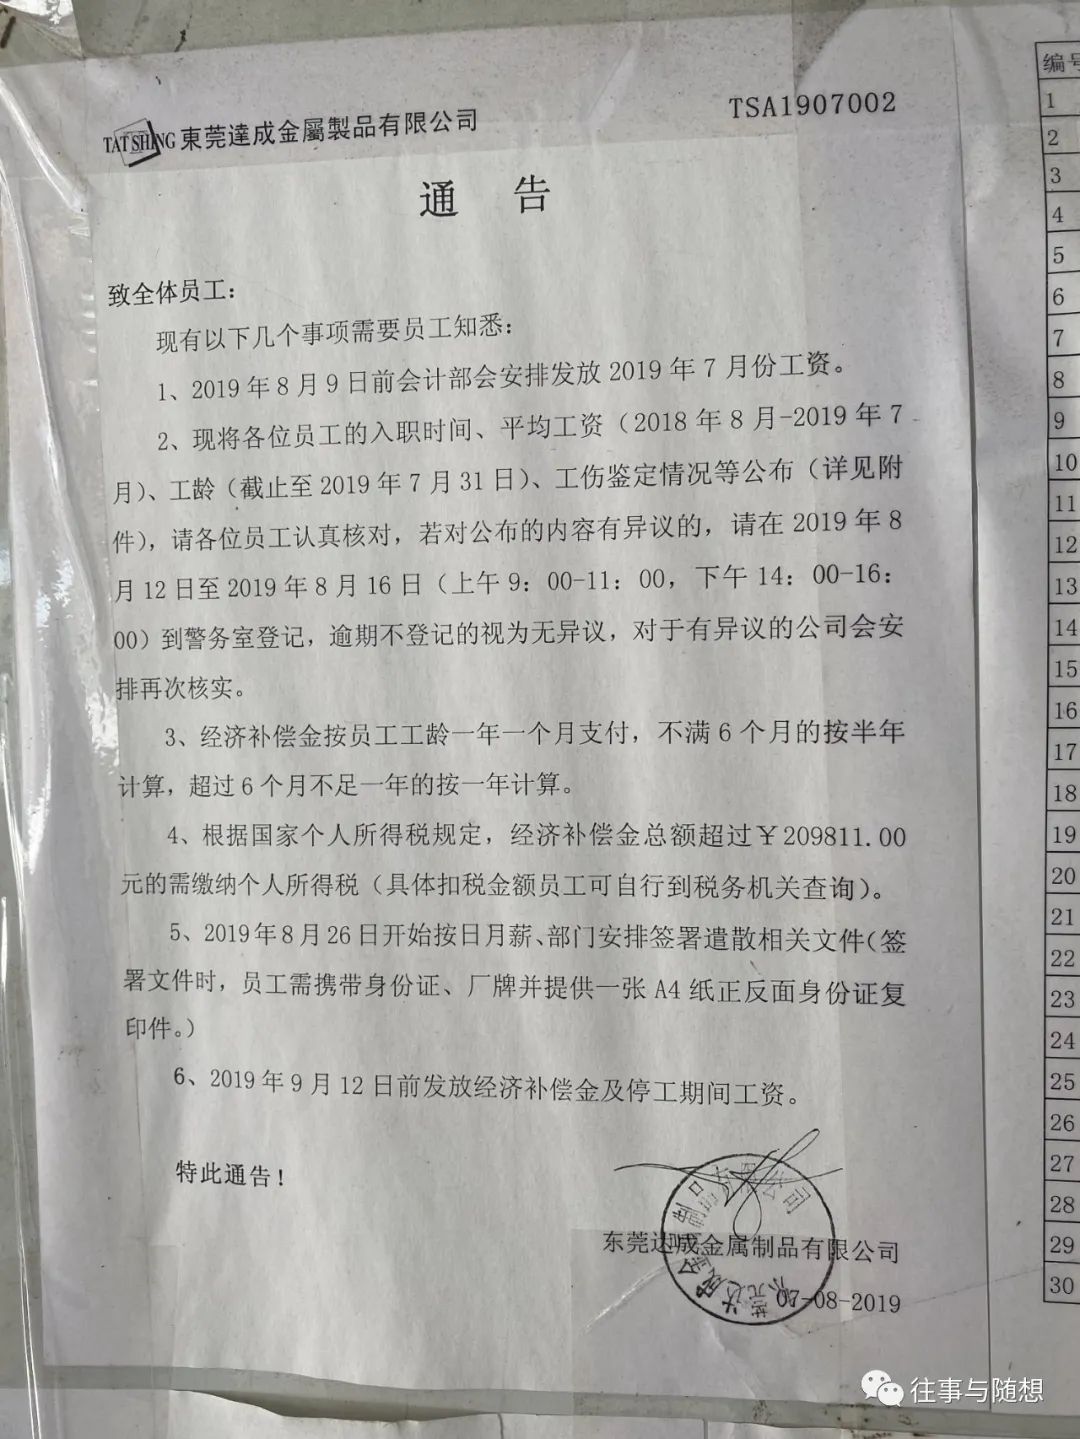 A white piece of paper posted to the wall, explaining salary payment and compensation for factory workers